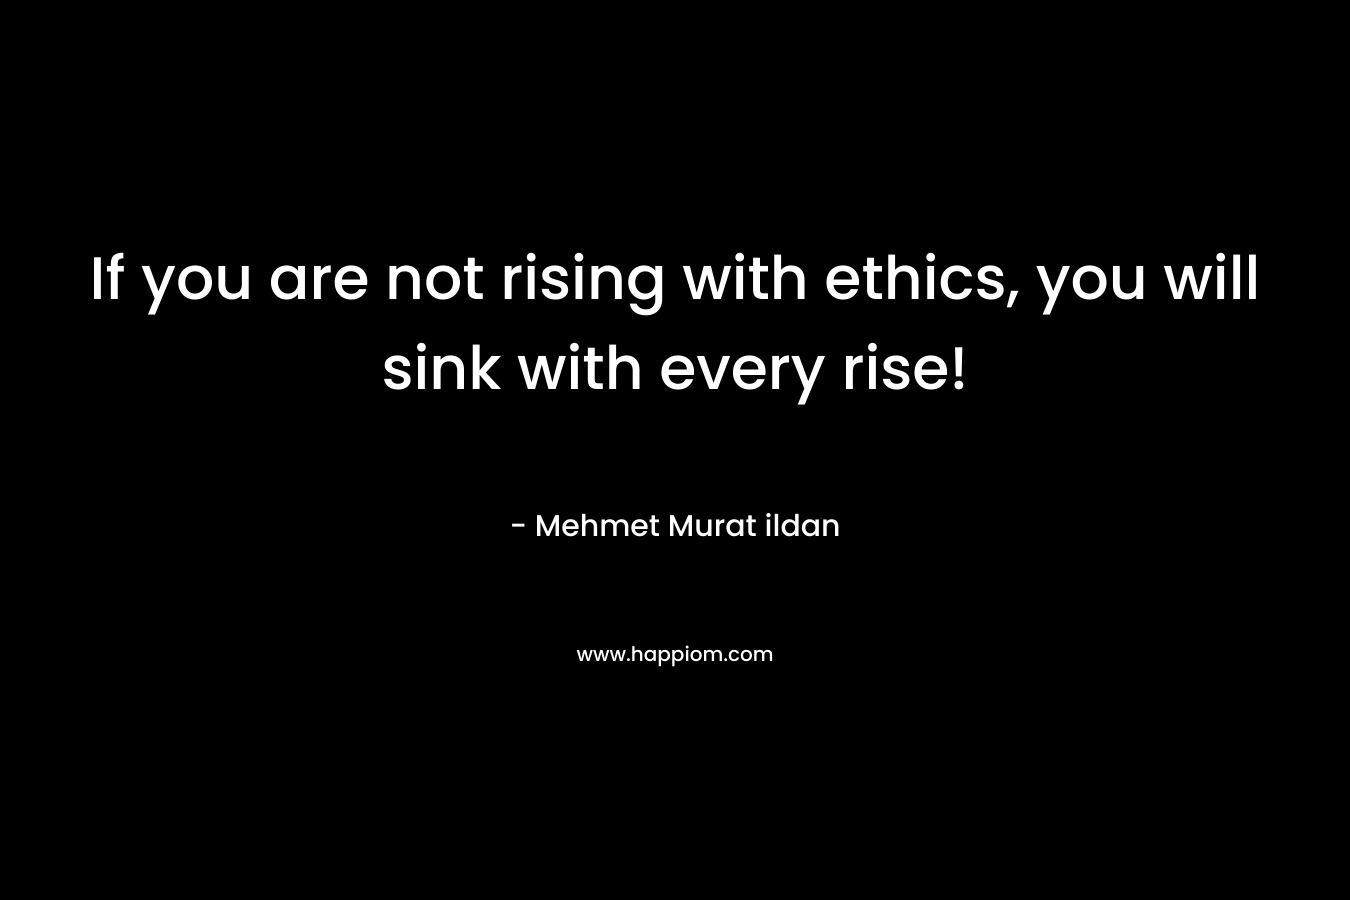 If you are not rising with ethics, you will sink with every rise! – Mehmet Murat ildan